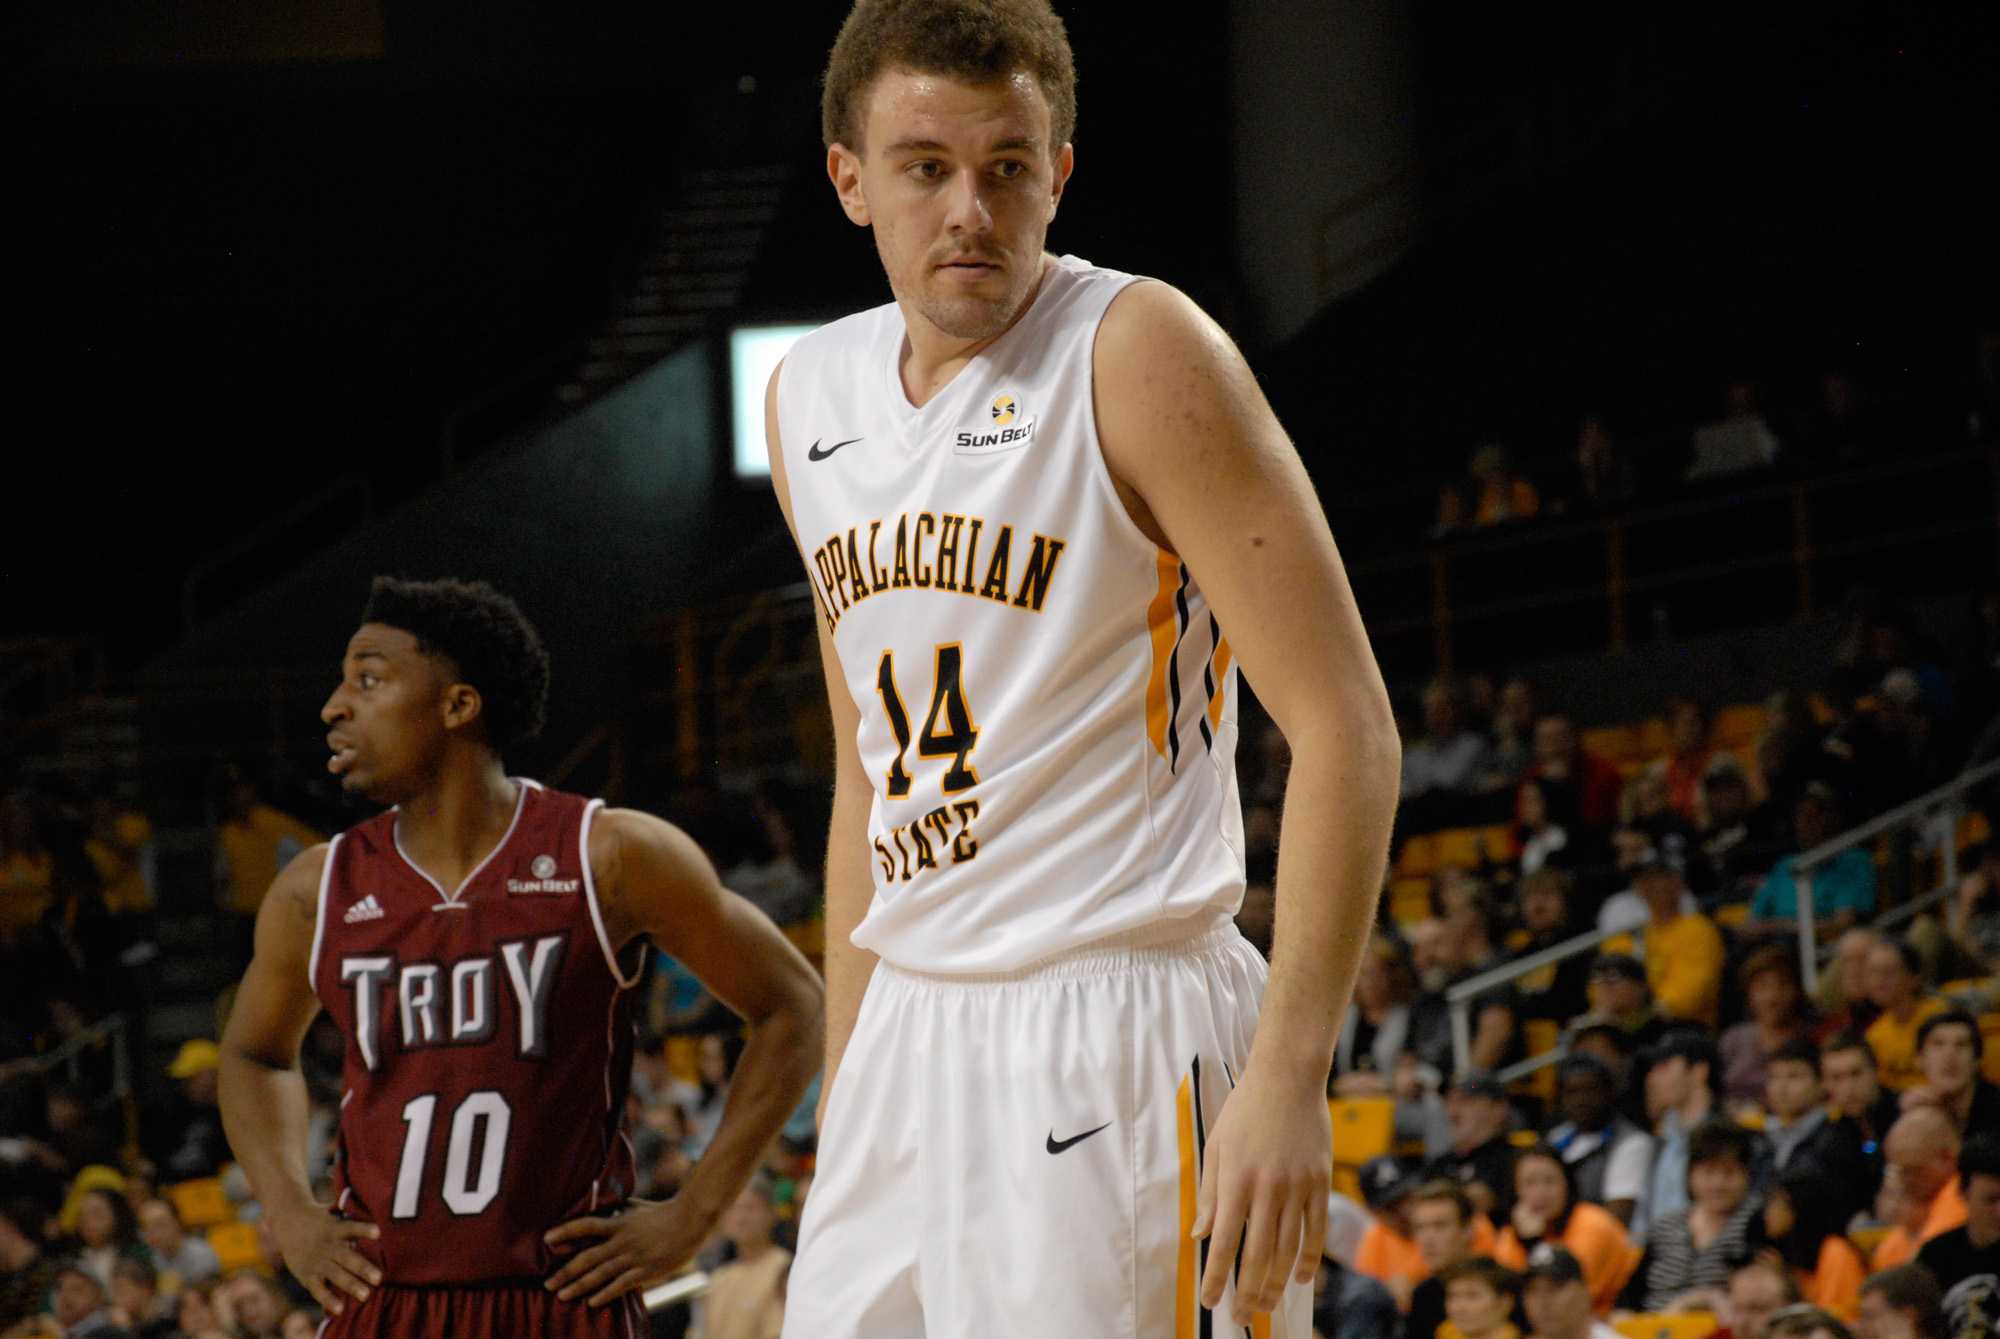 Freshman forward Milos Kostic glances at the sideline during a game against Troy this season. Kostic averages 7.8 minutes and has played in 15 games. Photo by Corey Spiers  |  The Appalachian